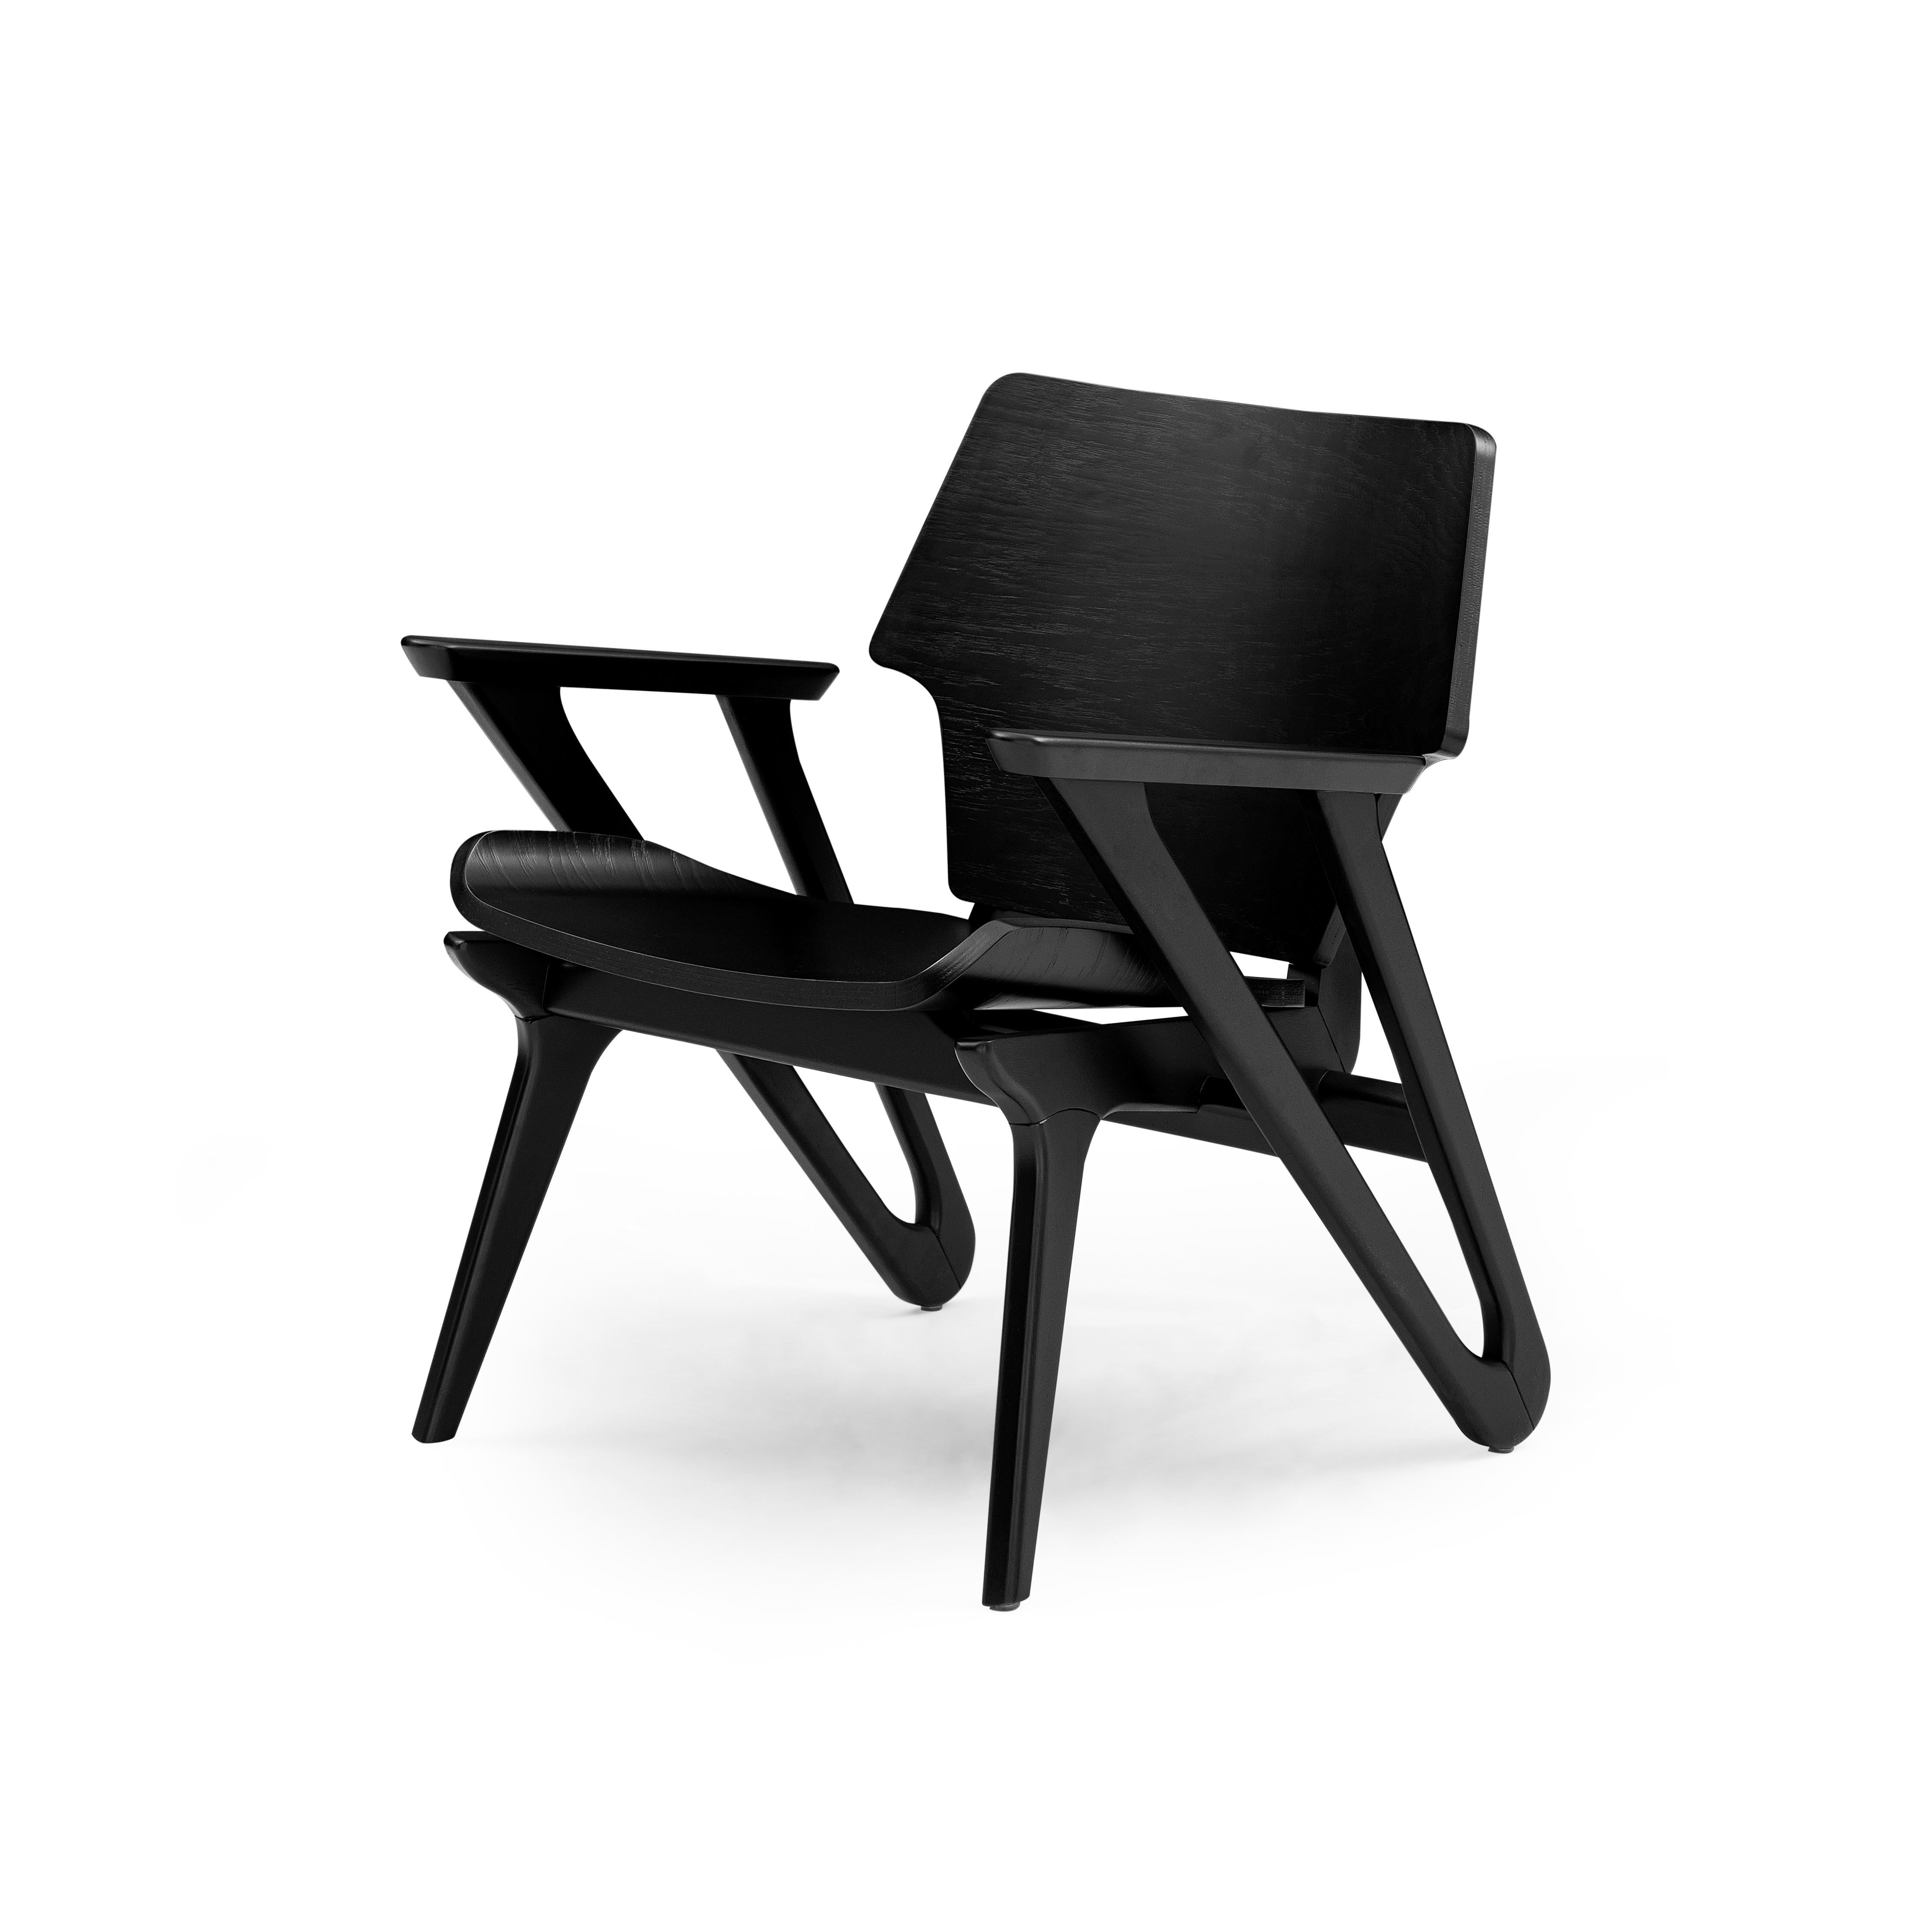 This minimalist Velo armchair with a shaped seat and back, features a simple and streamlined design, with geometric shapes and curved seating with soft and strong cornering that emphasizes simplicity and functionality in a beautiful Uultis